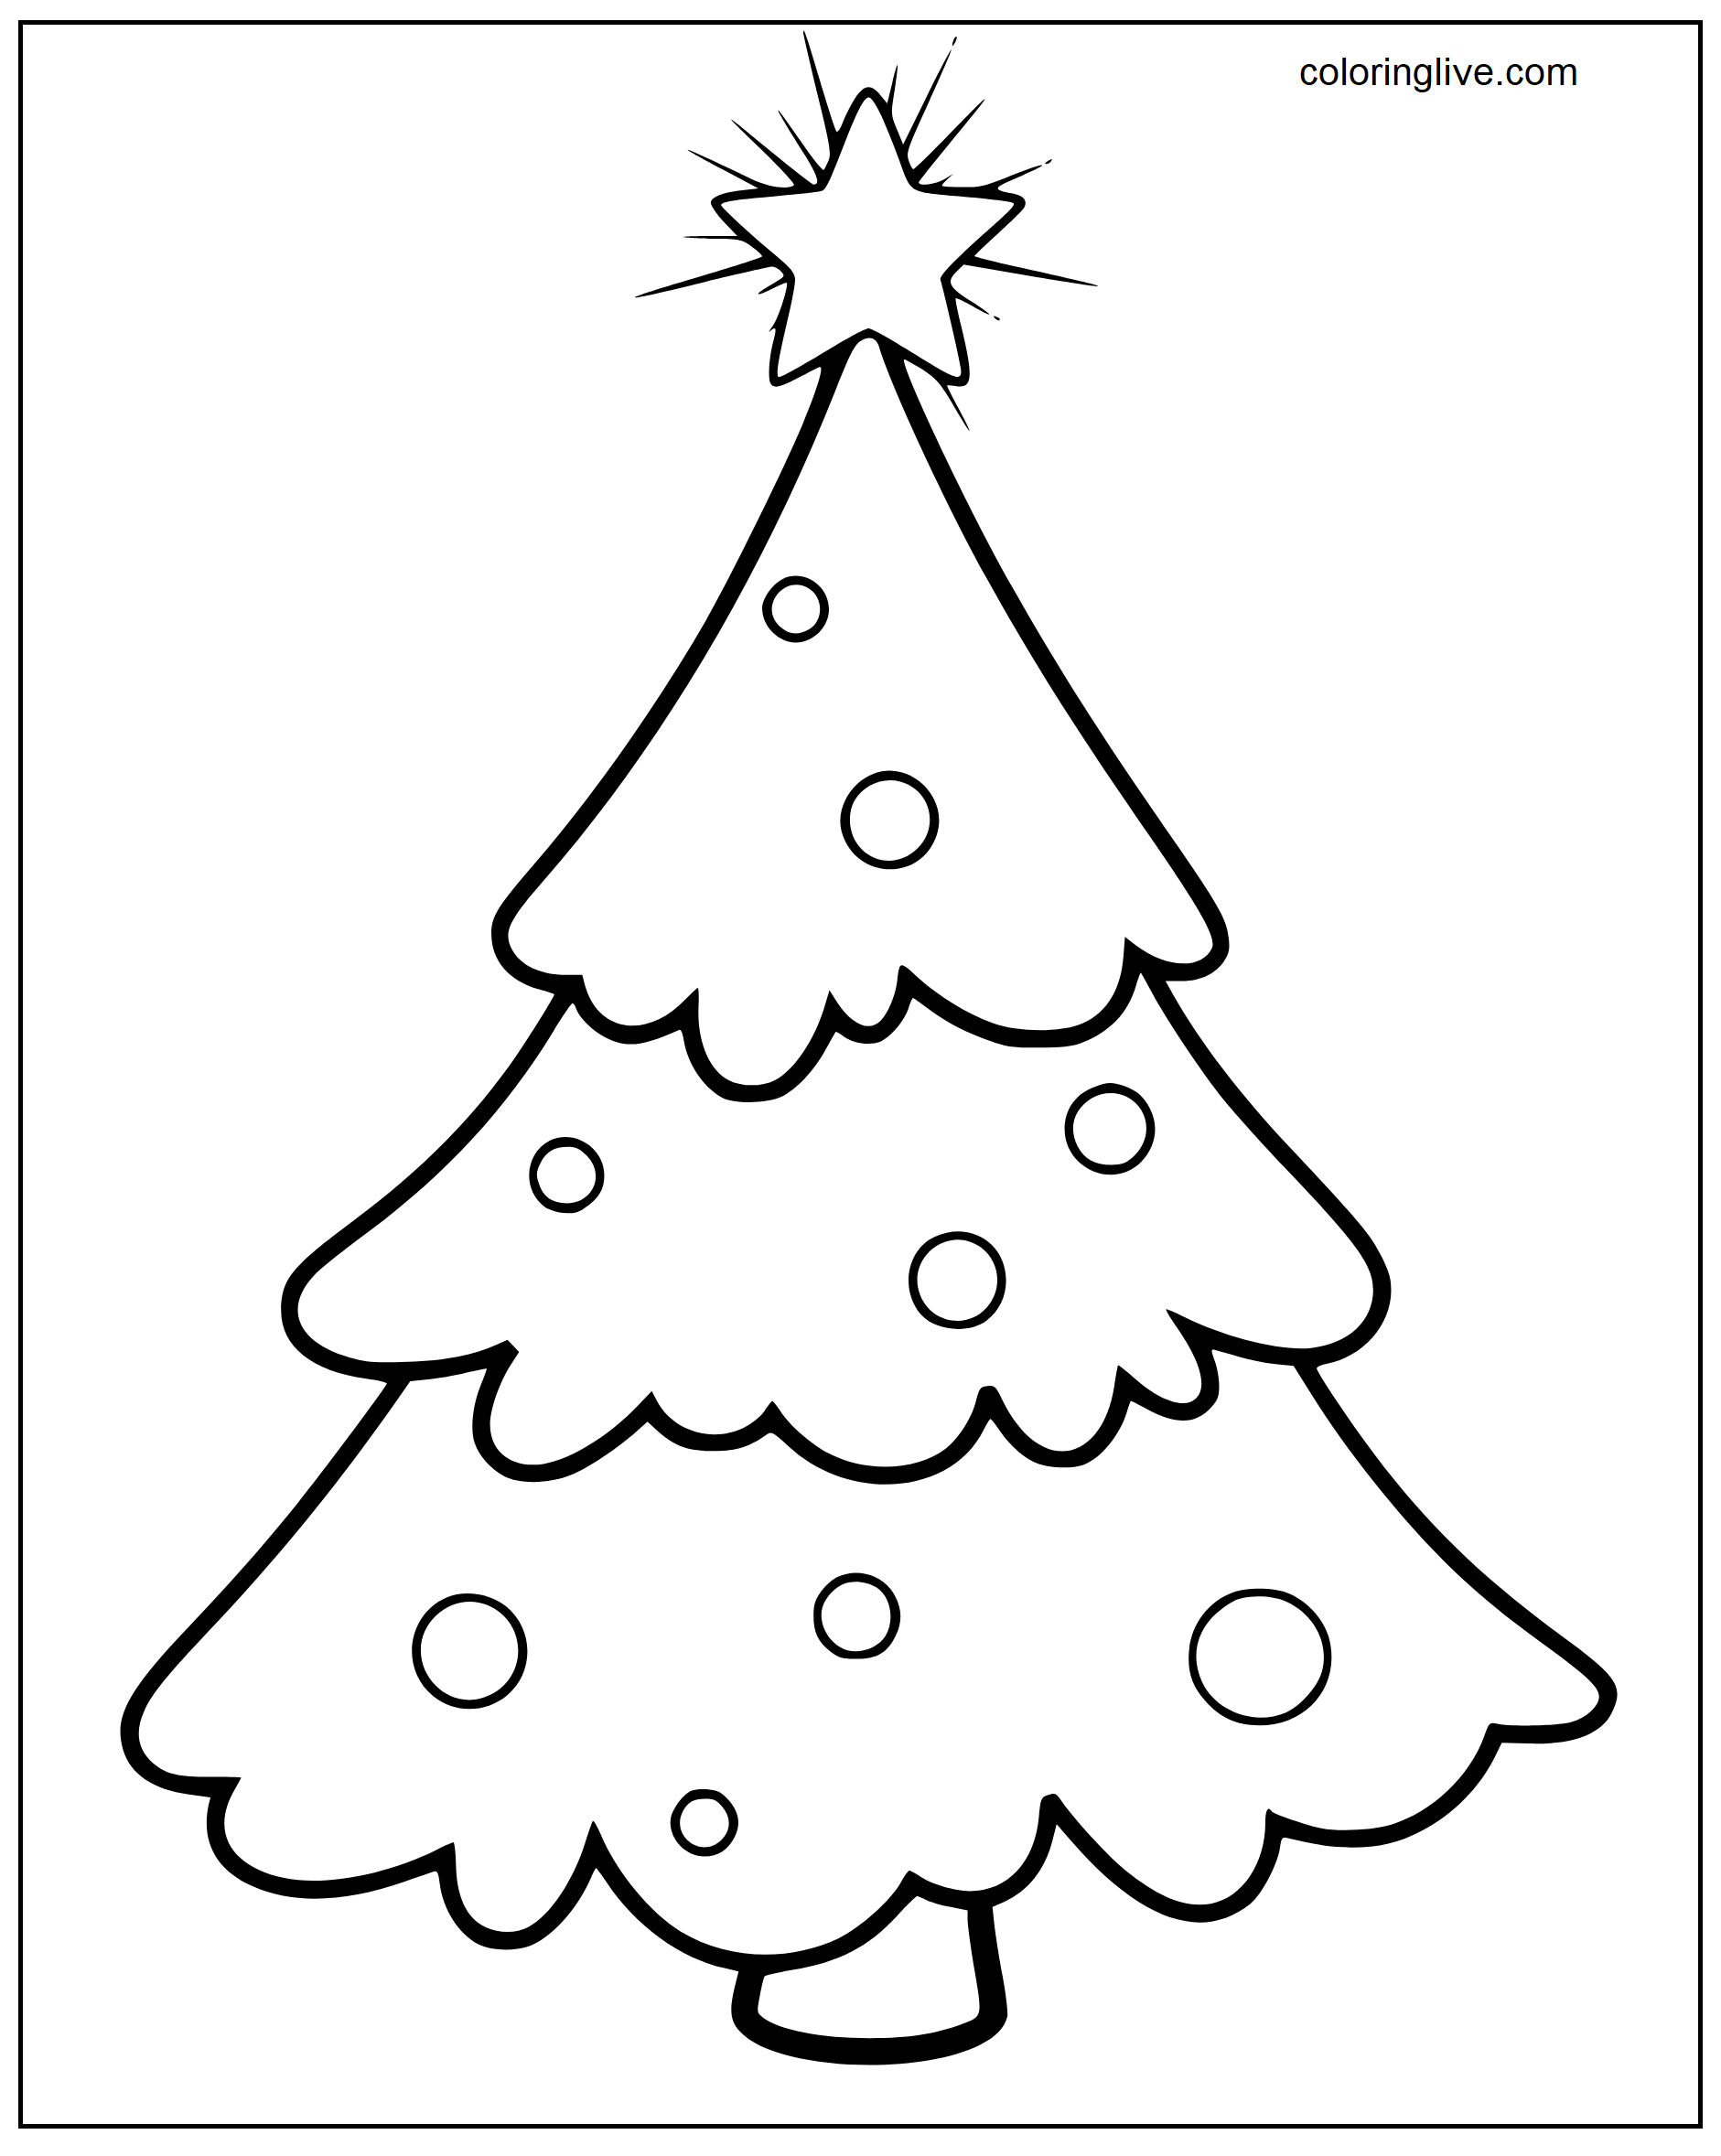 Printable A christmas tree with a star Coloring Page for kids.